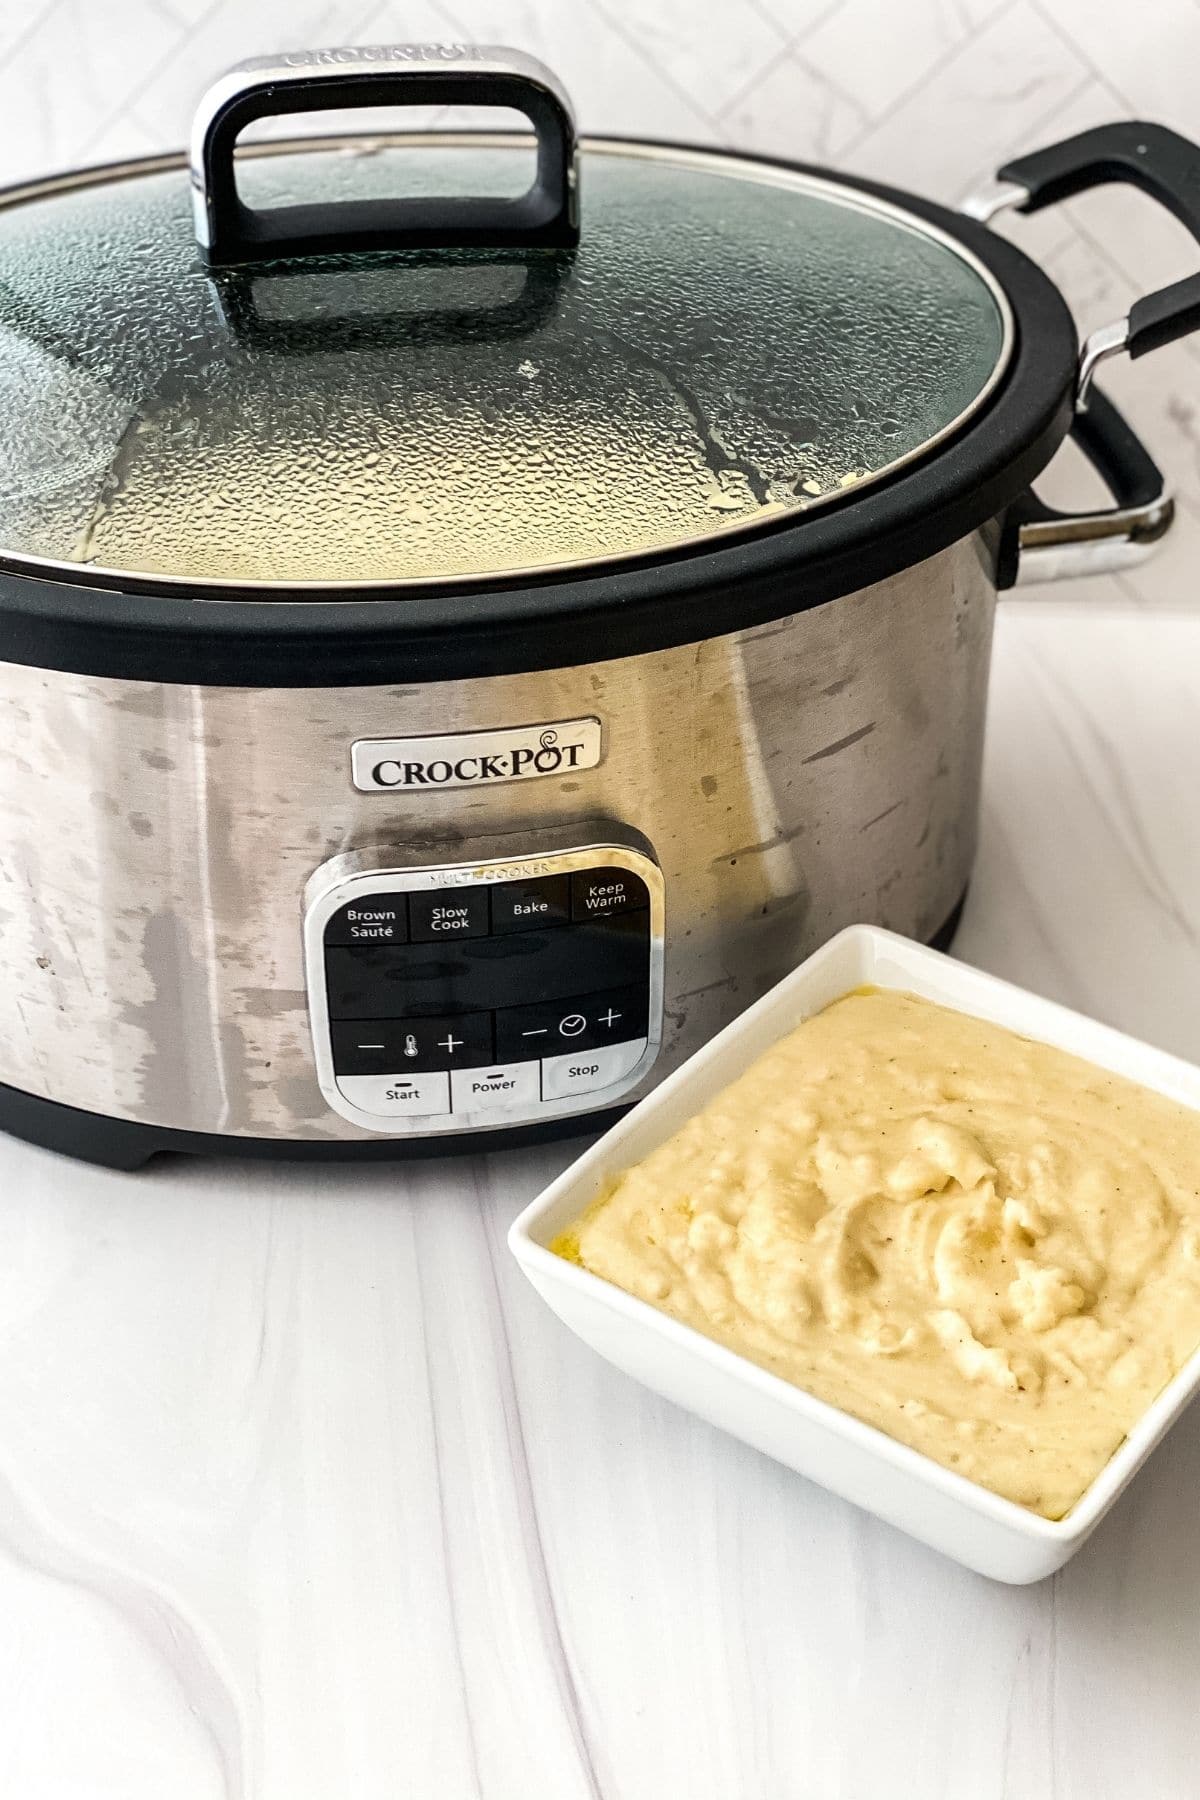 Crockpot with lid on by white bowl of mashed potatoes